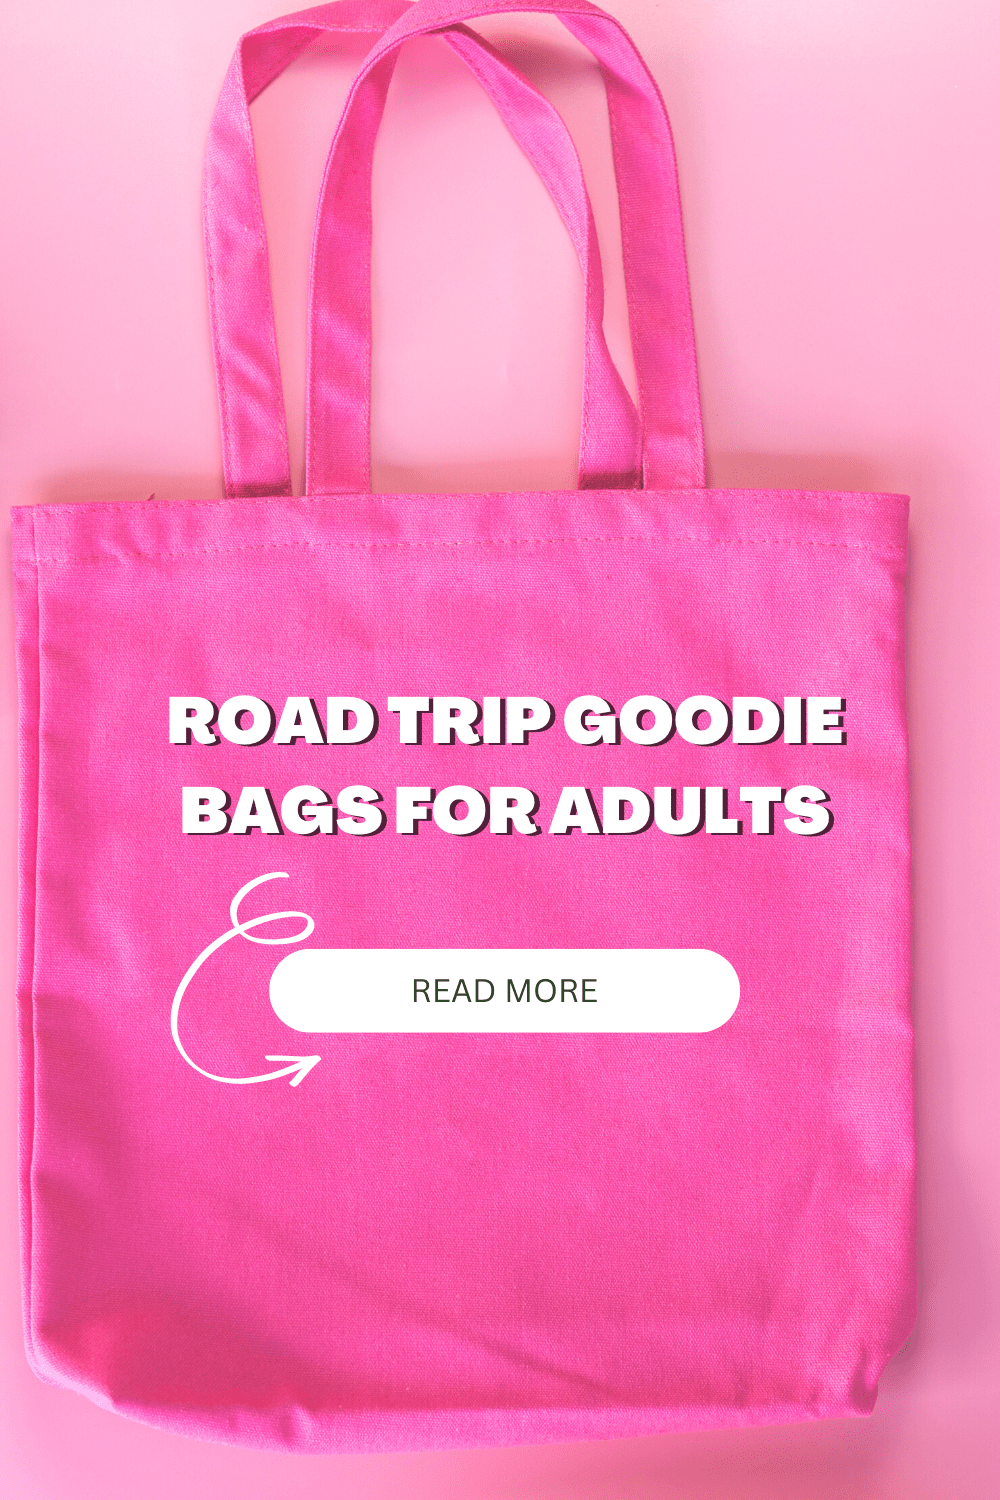 Road trips are a fun way to travel. If you want to make your travels even more fun for everyone in the car, consider putting together some road trip goodie bags for adults that provide practical and entertaining items that everyone will use. Want some ideas for what to put in a road trip goodie bag for adults? Read on for some different categories of items to include and ideas and inspiration for each! #RoadTrip #RoadTripGoodieBags #RoadTripGoodieBagsForAdults #RoadTripPlanning